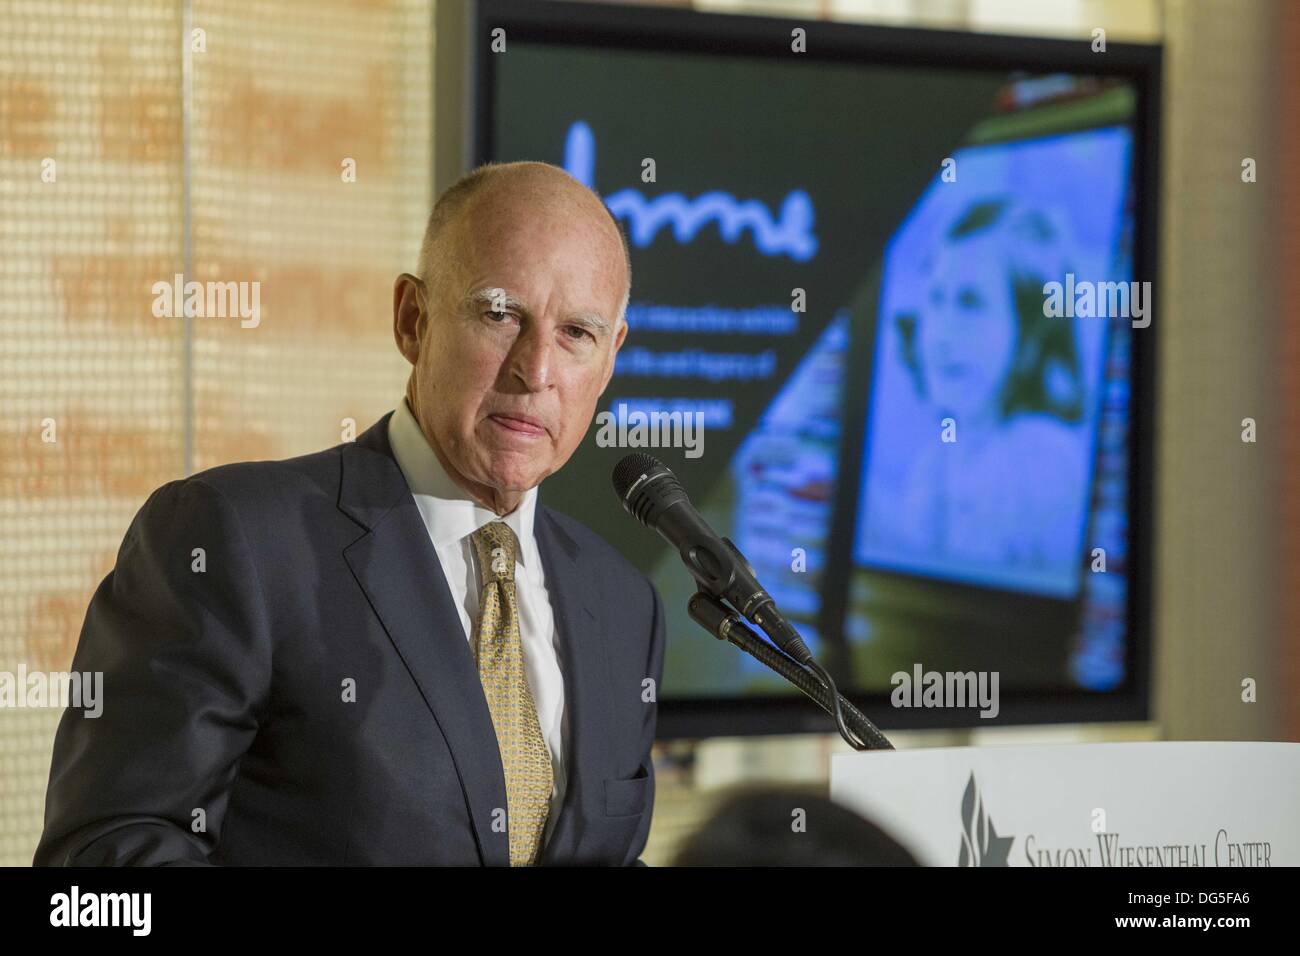 Los Angeles, California, USA. 14th Oct, 2013. California Governor Jerry Brown delivers a keynote at the Museum of Tolerance's opening of ''Anne'' exhibition on Monday October 14, 2013 in Los Angeles. ''Anne'' a 60-minute experience created by the Simon Wiesenthal Center and narrated by actress Hailee Steinfeld that brings to life the story of Anne Frank through multimedia presentations displays. © Ringo Chiu/ZUMAPRESS.com/Alamy Live News Stock Photo